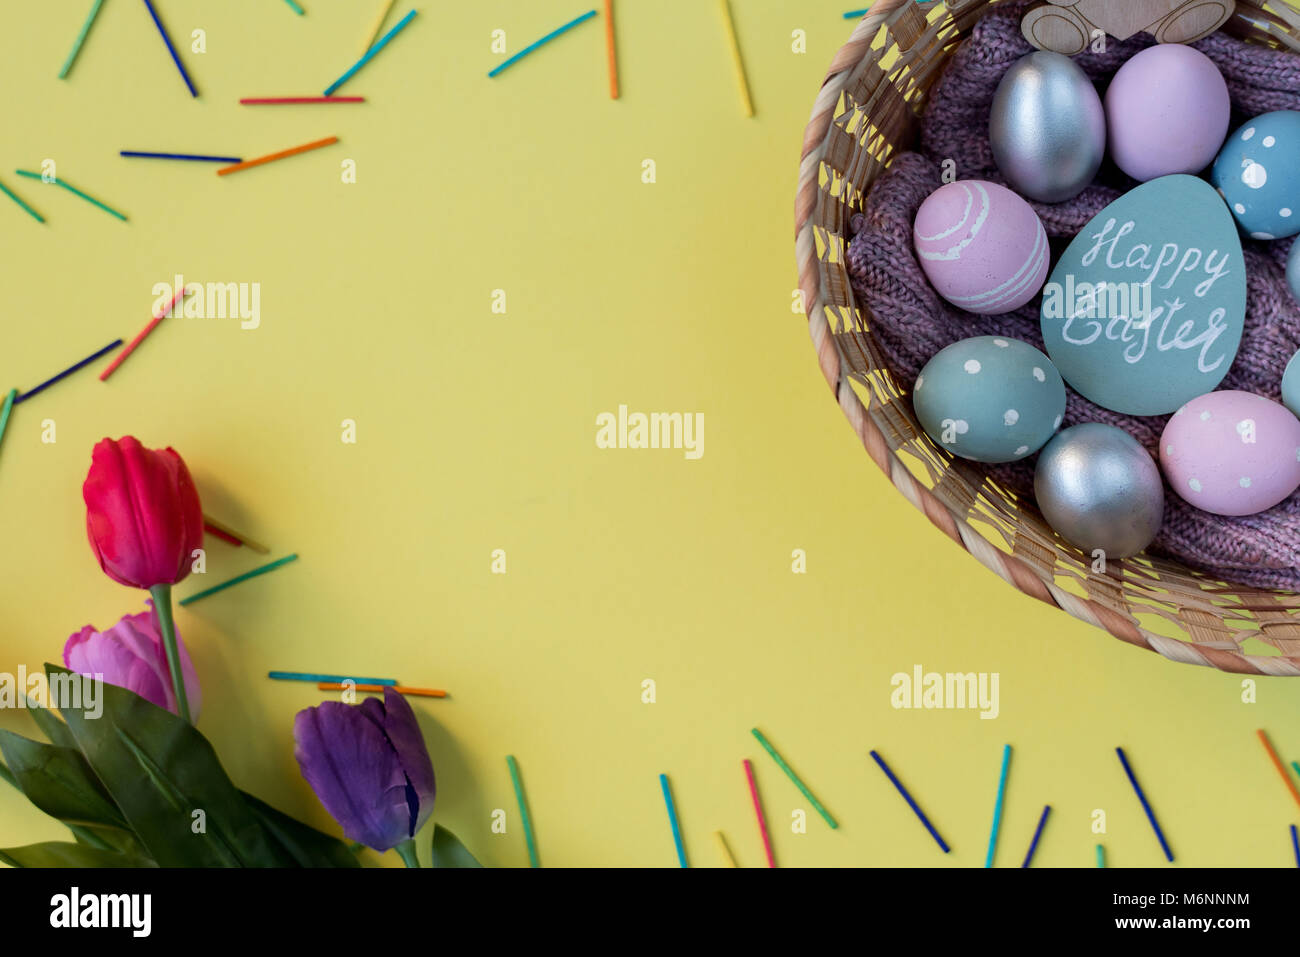 Happy Easter Background Stock Photo